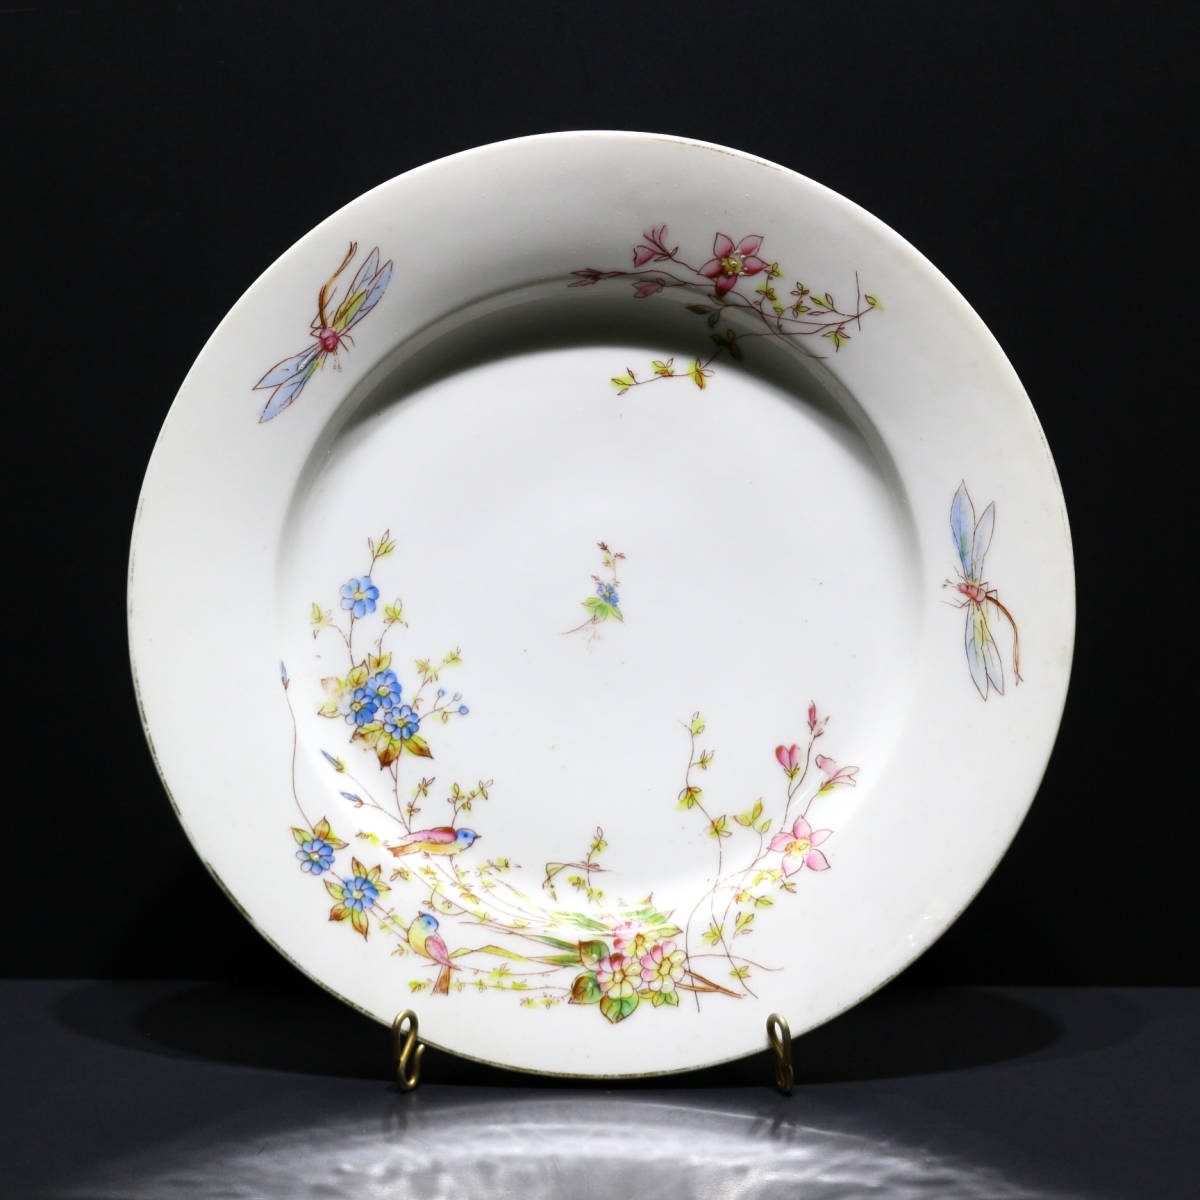 French Antique / Plate / Hand Painted / Chinoiserie / Hand Painted / Flowers and Birds / Large Plate / Western Tableware / Painted Plate, western ceramics, Antique ceramics in general, 1800 - 1900